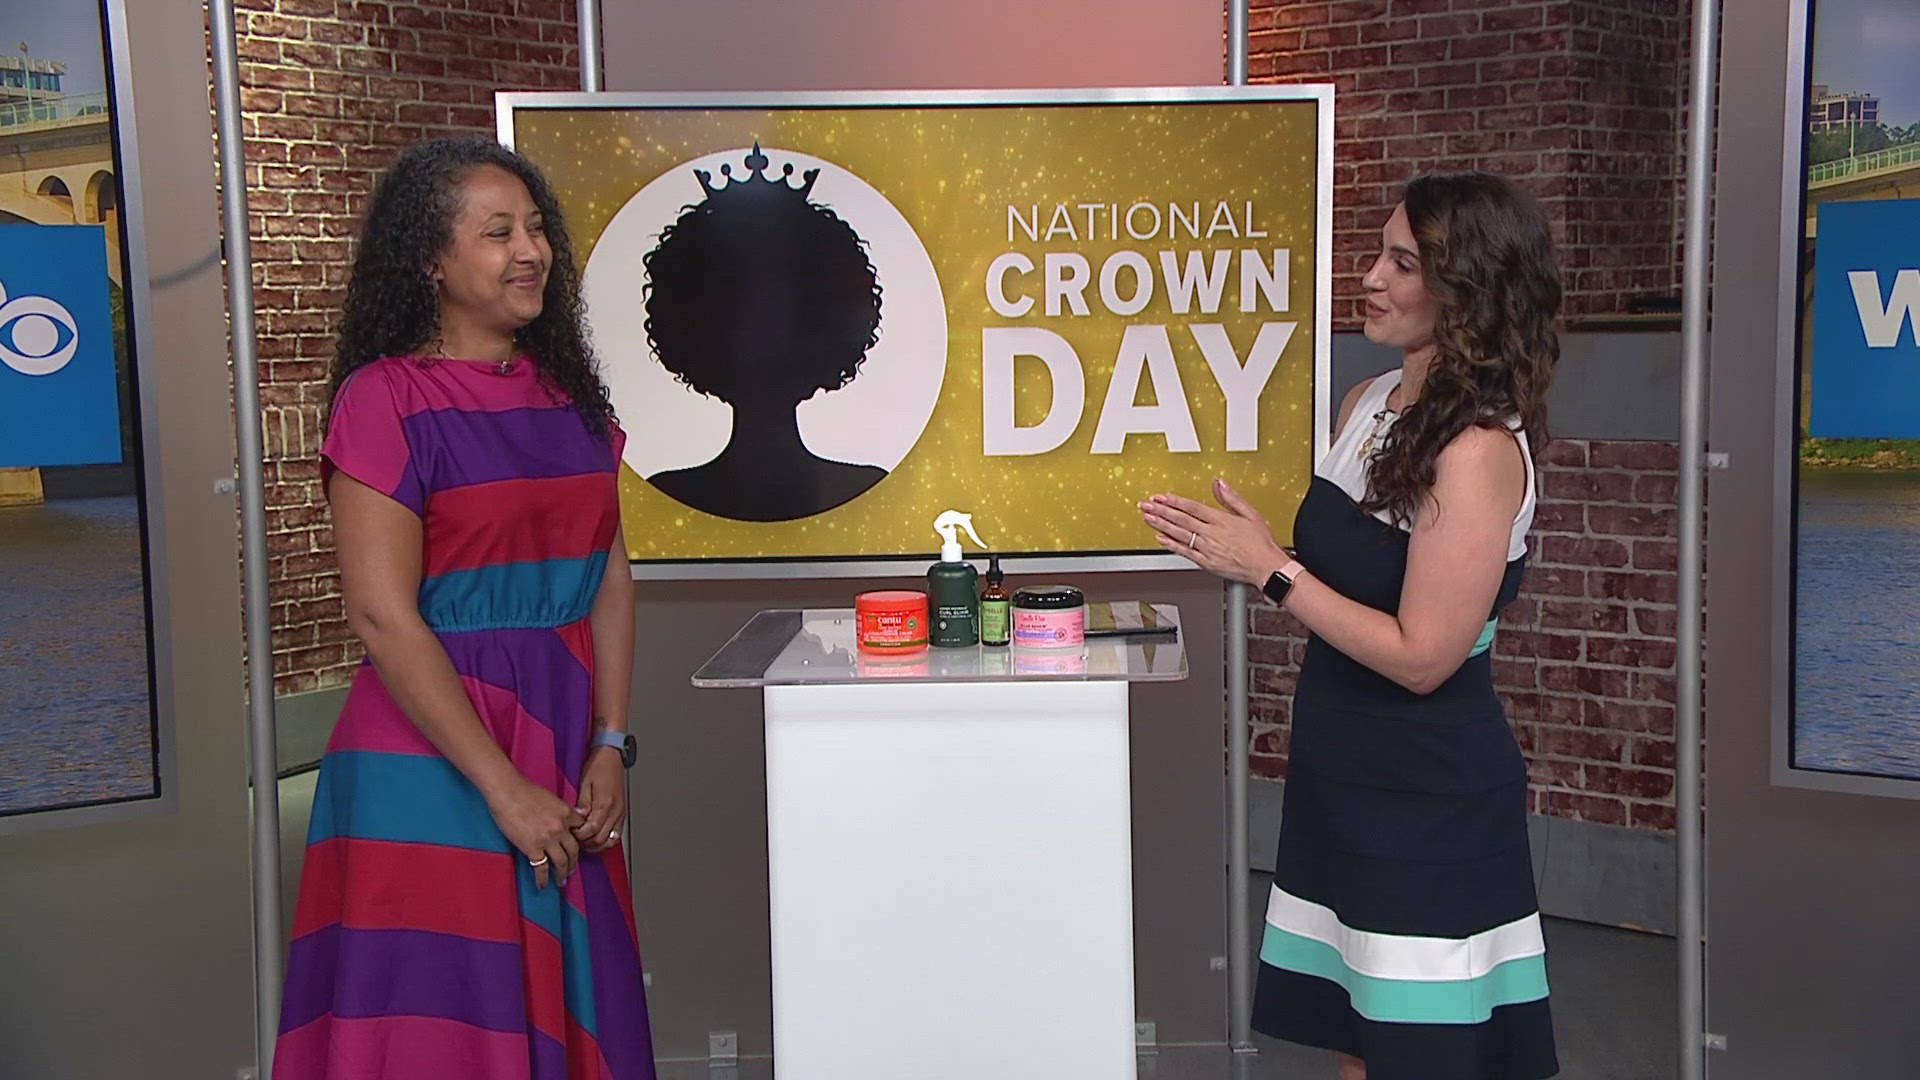 AS WE REFLECT ON THE CROWN ACT... WE TAKE A LOOK AT ITS IMPACT HERE IN THE DMV